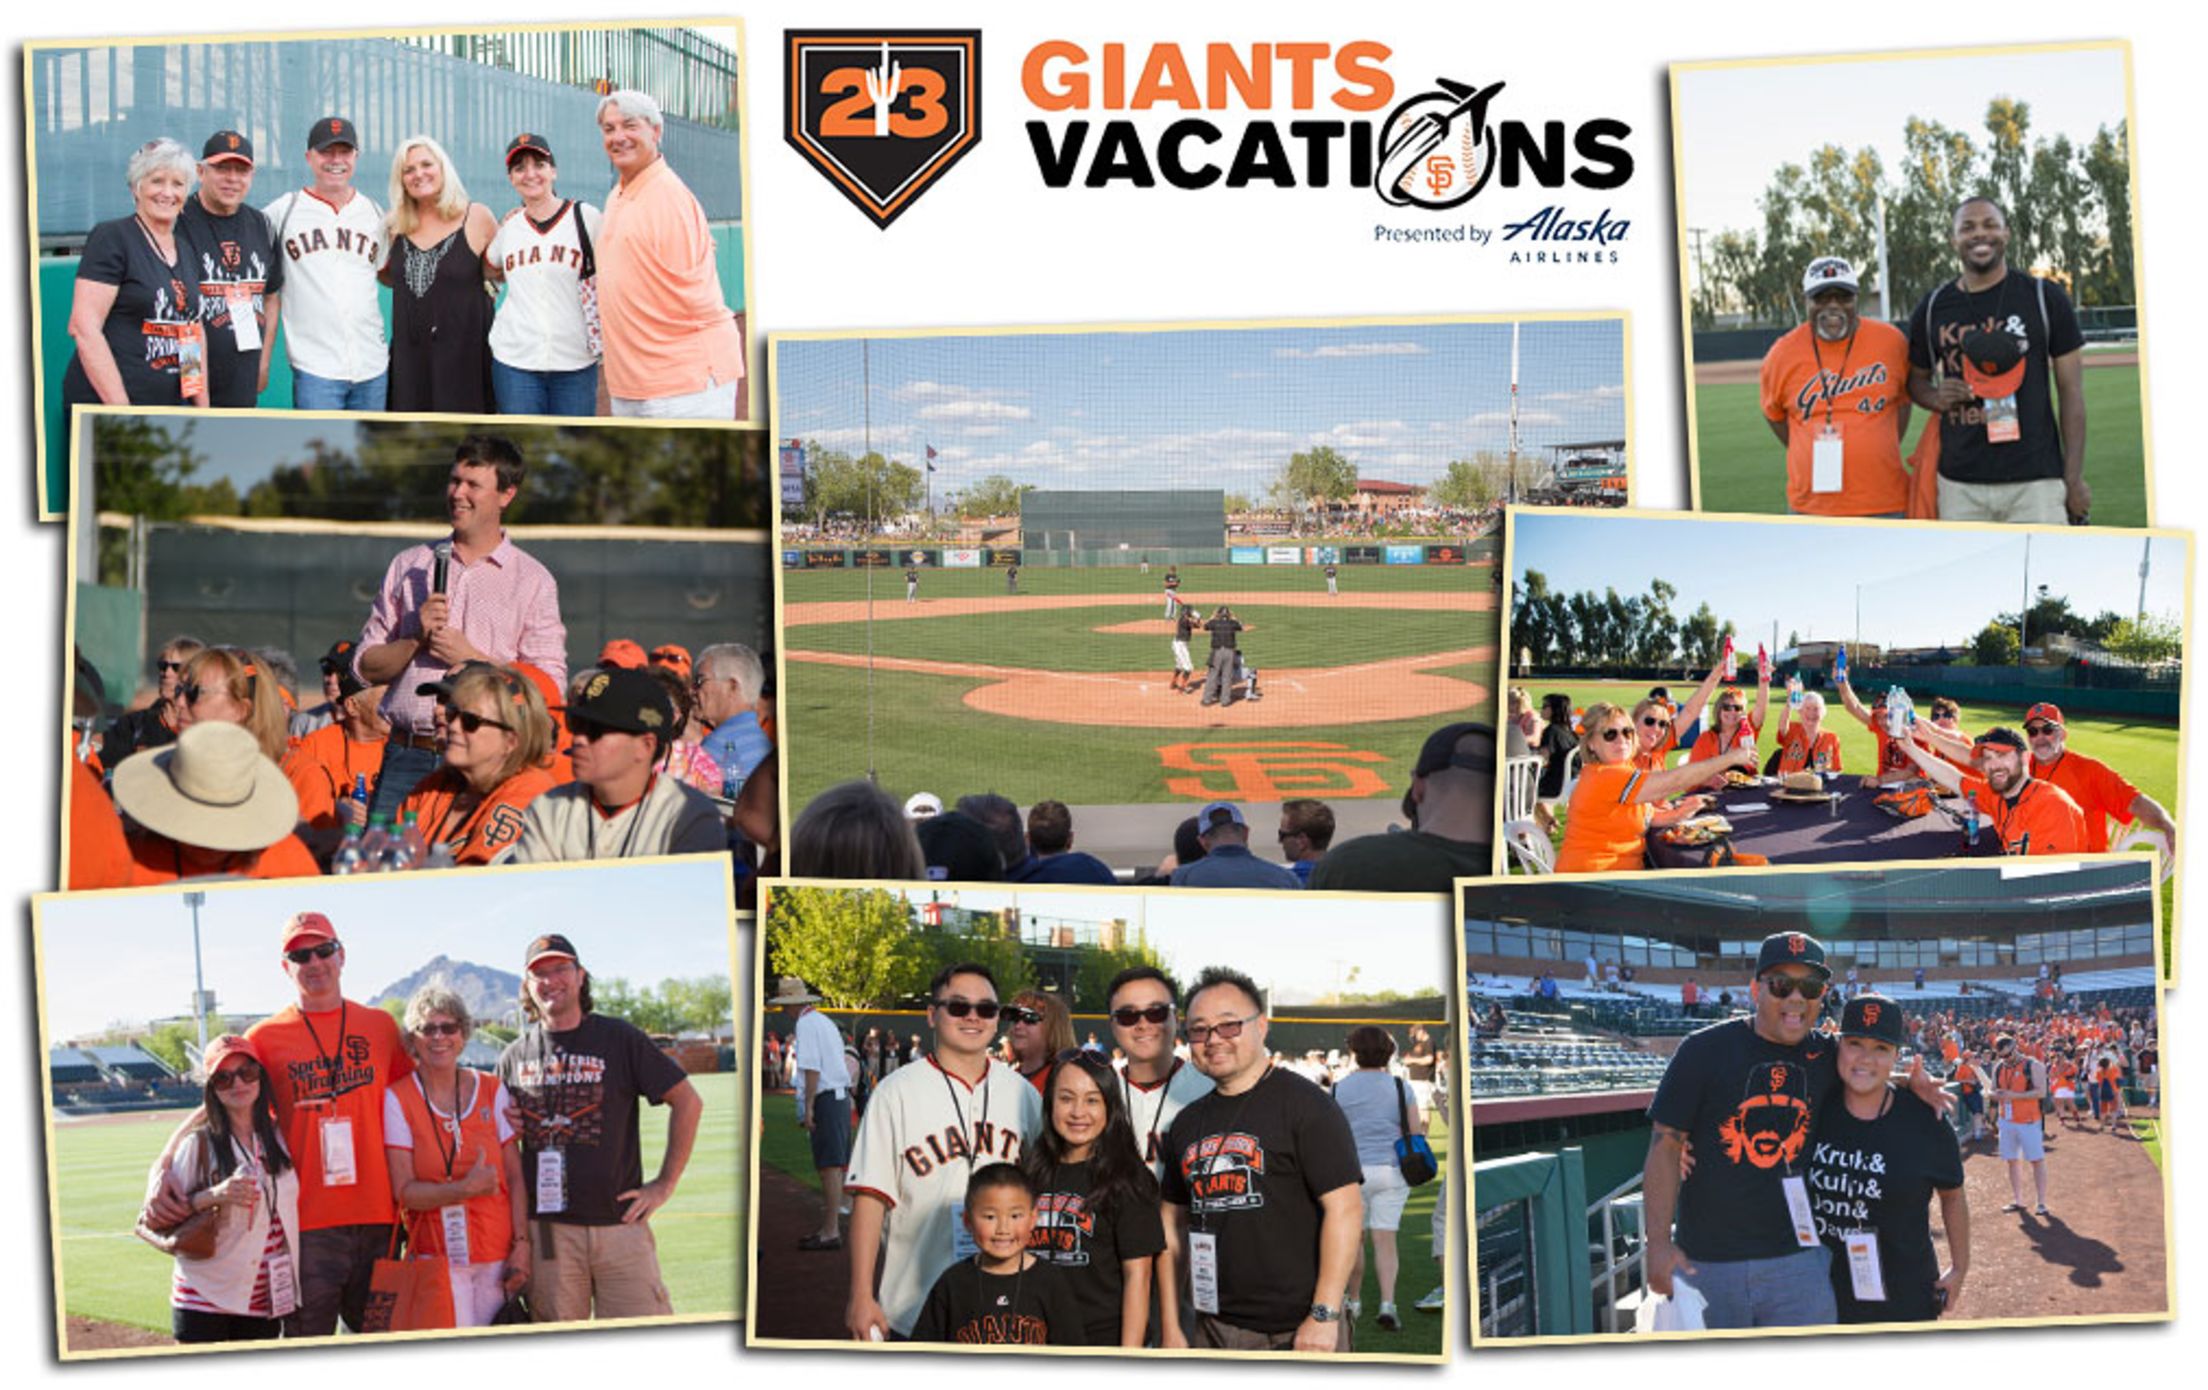 Spring Training Vacations San Francisco Giants